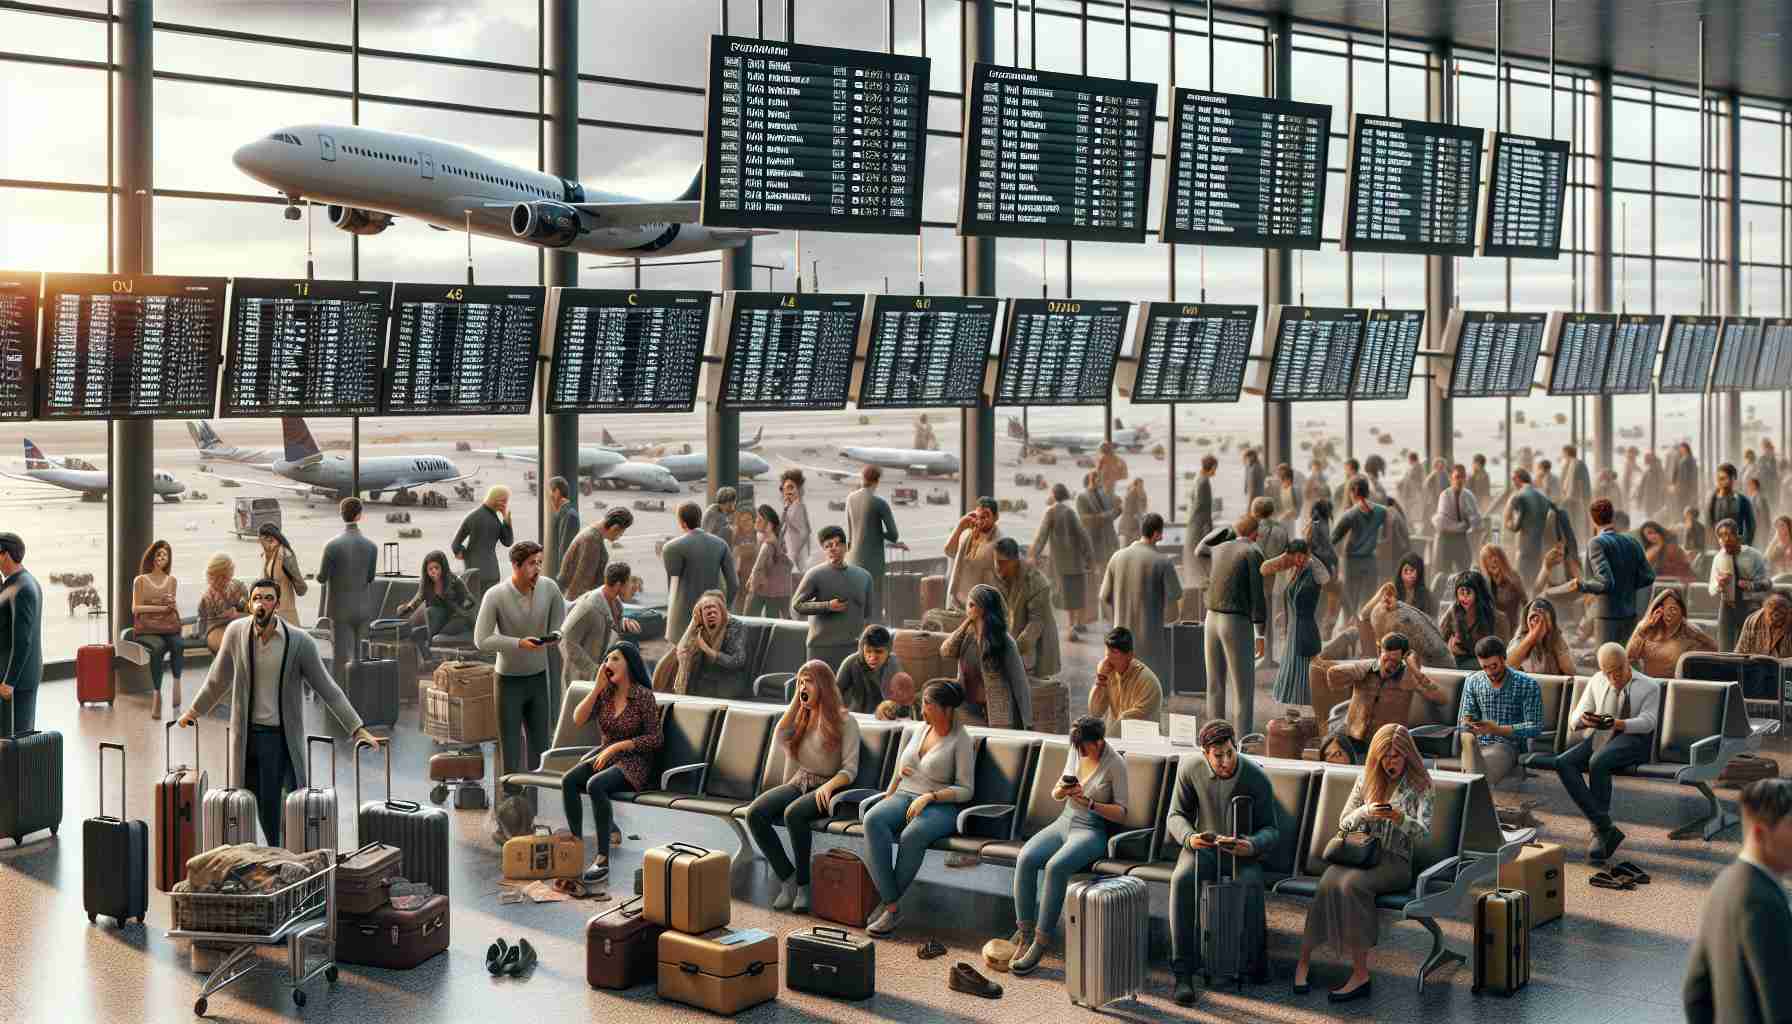 Realistic high-definition image depicting a scene of widespread travel chaos. Several passengers of different descents such as Caucasian, Hispanic, Black and Middle-Eastern, both males and females, look panicked and stressed in a bustling airport. Annunciators flicker with flight status updates and delays. The check-in desks are filled with people trying to reschedule their flights, while others anxiously hover over their mobile devices, seeking alternative arrangements. Luggage is strewn about the terminal, symbolizing the disruption in flight operations. Outside, through the large glass windows, grounded planes can be seen, depicting the scale of disruption.